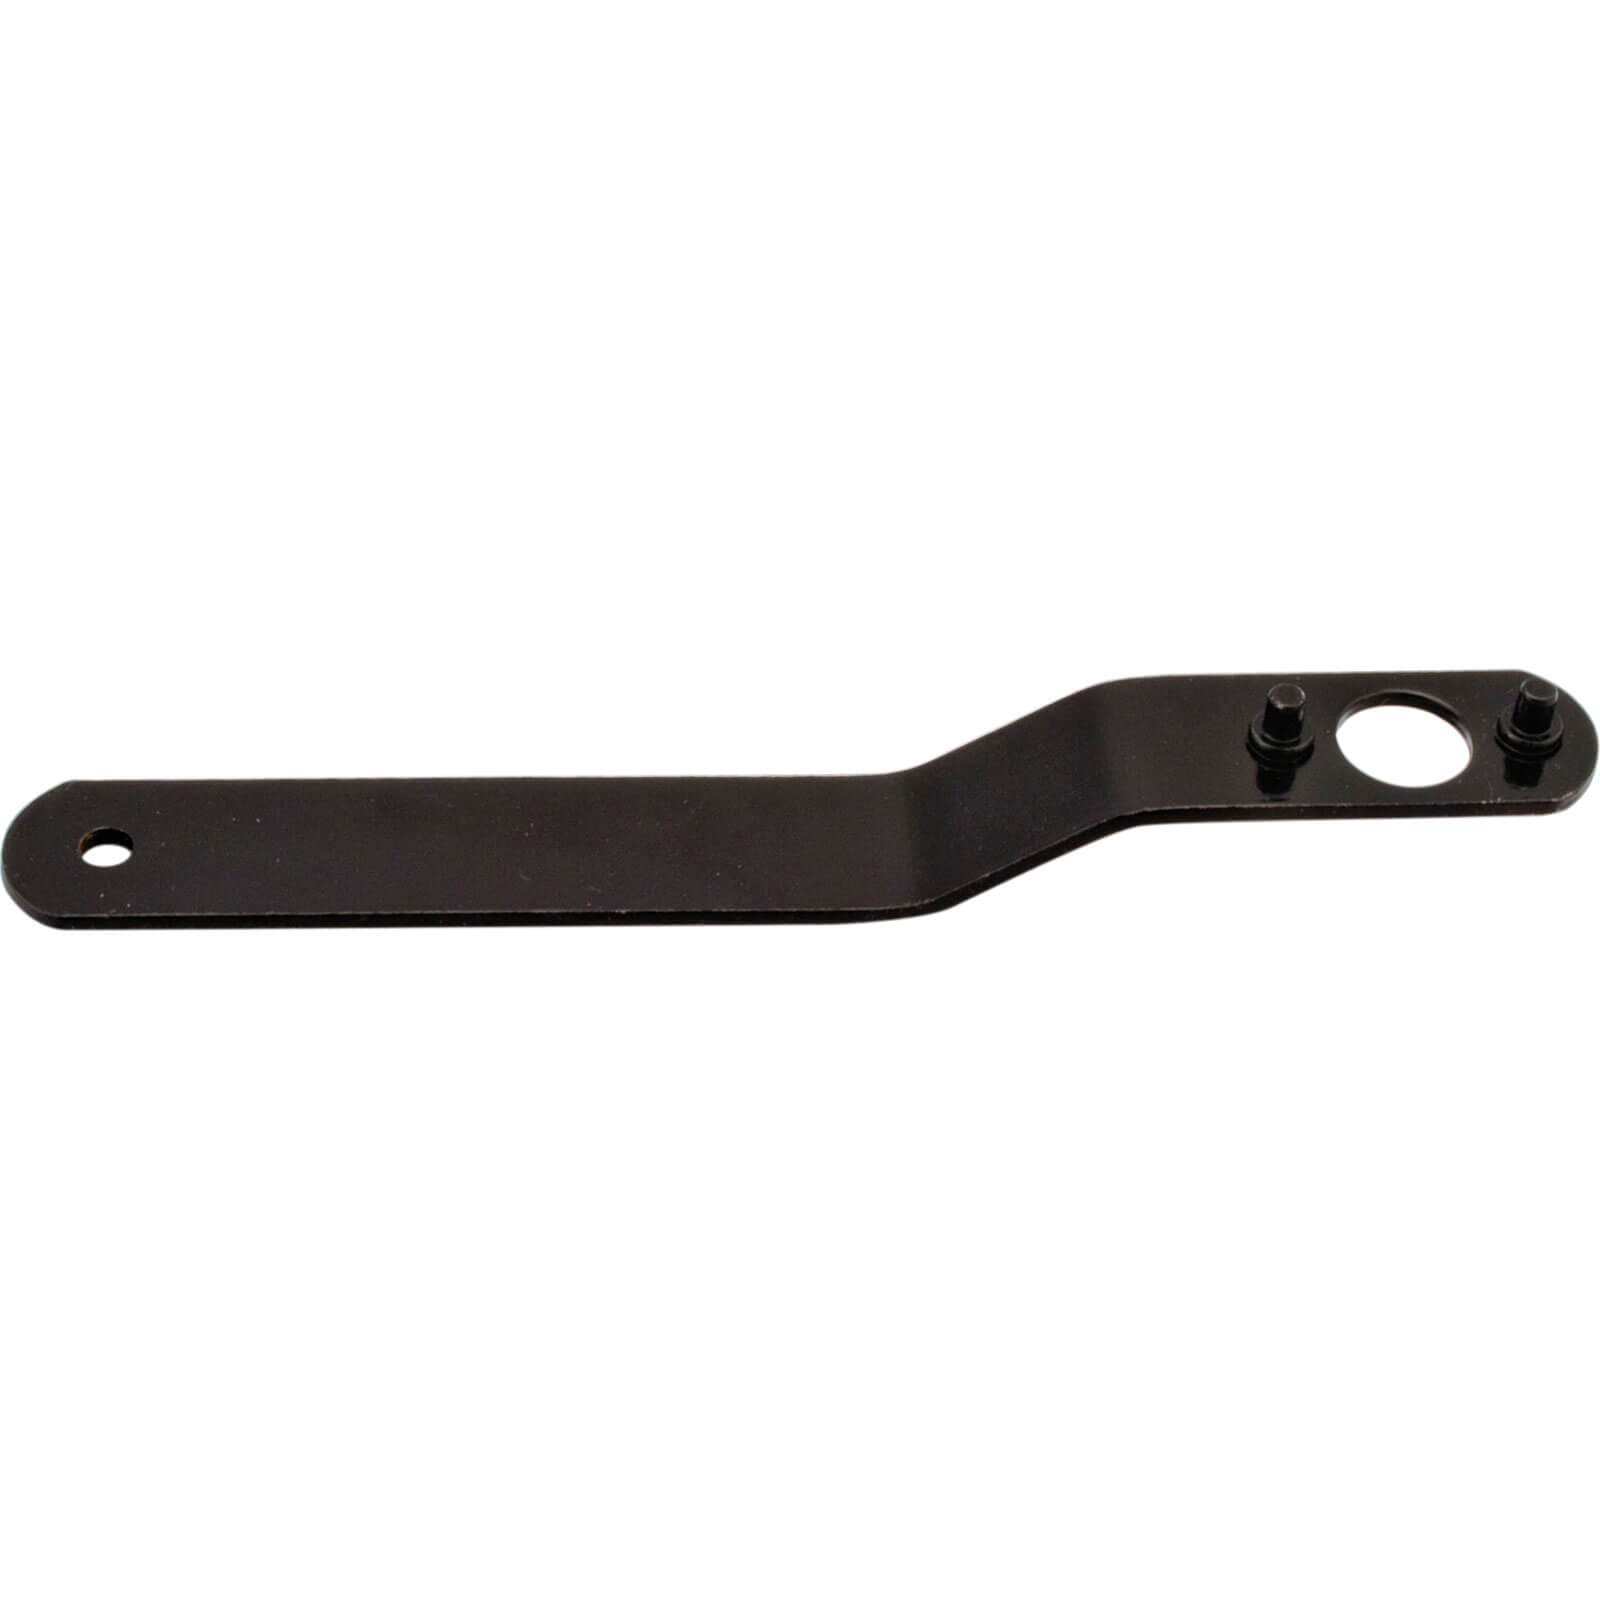 Photos - Wrench Flexipads 32-5 Black Angle Grinder Pin Spanner 24045